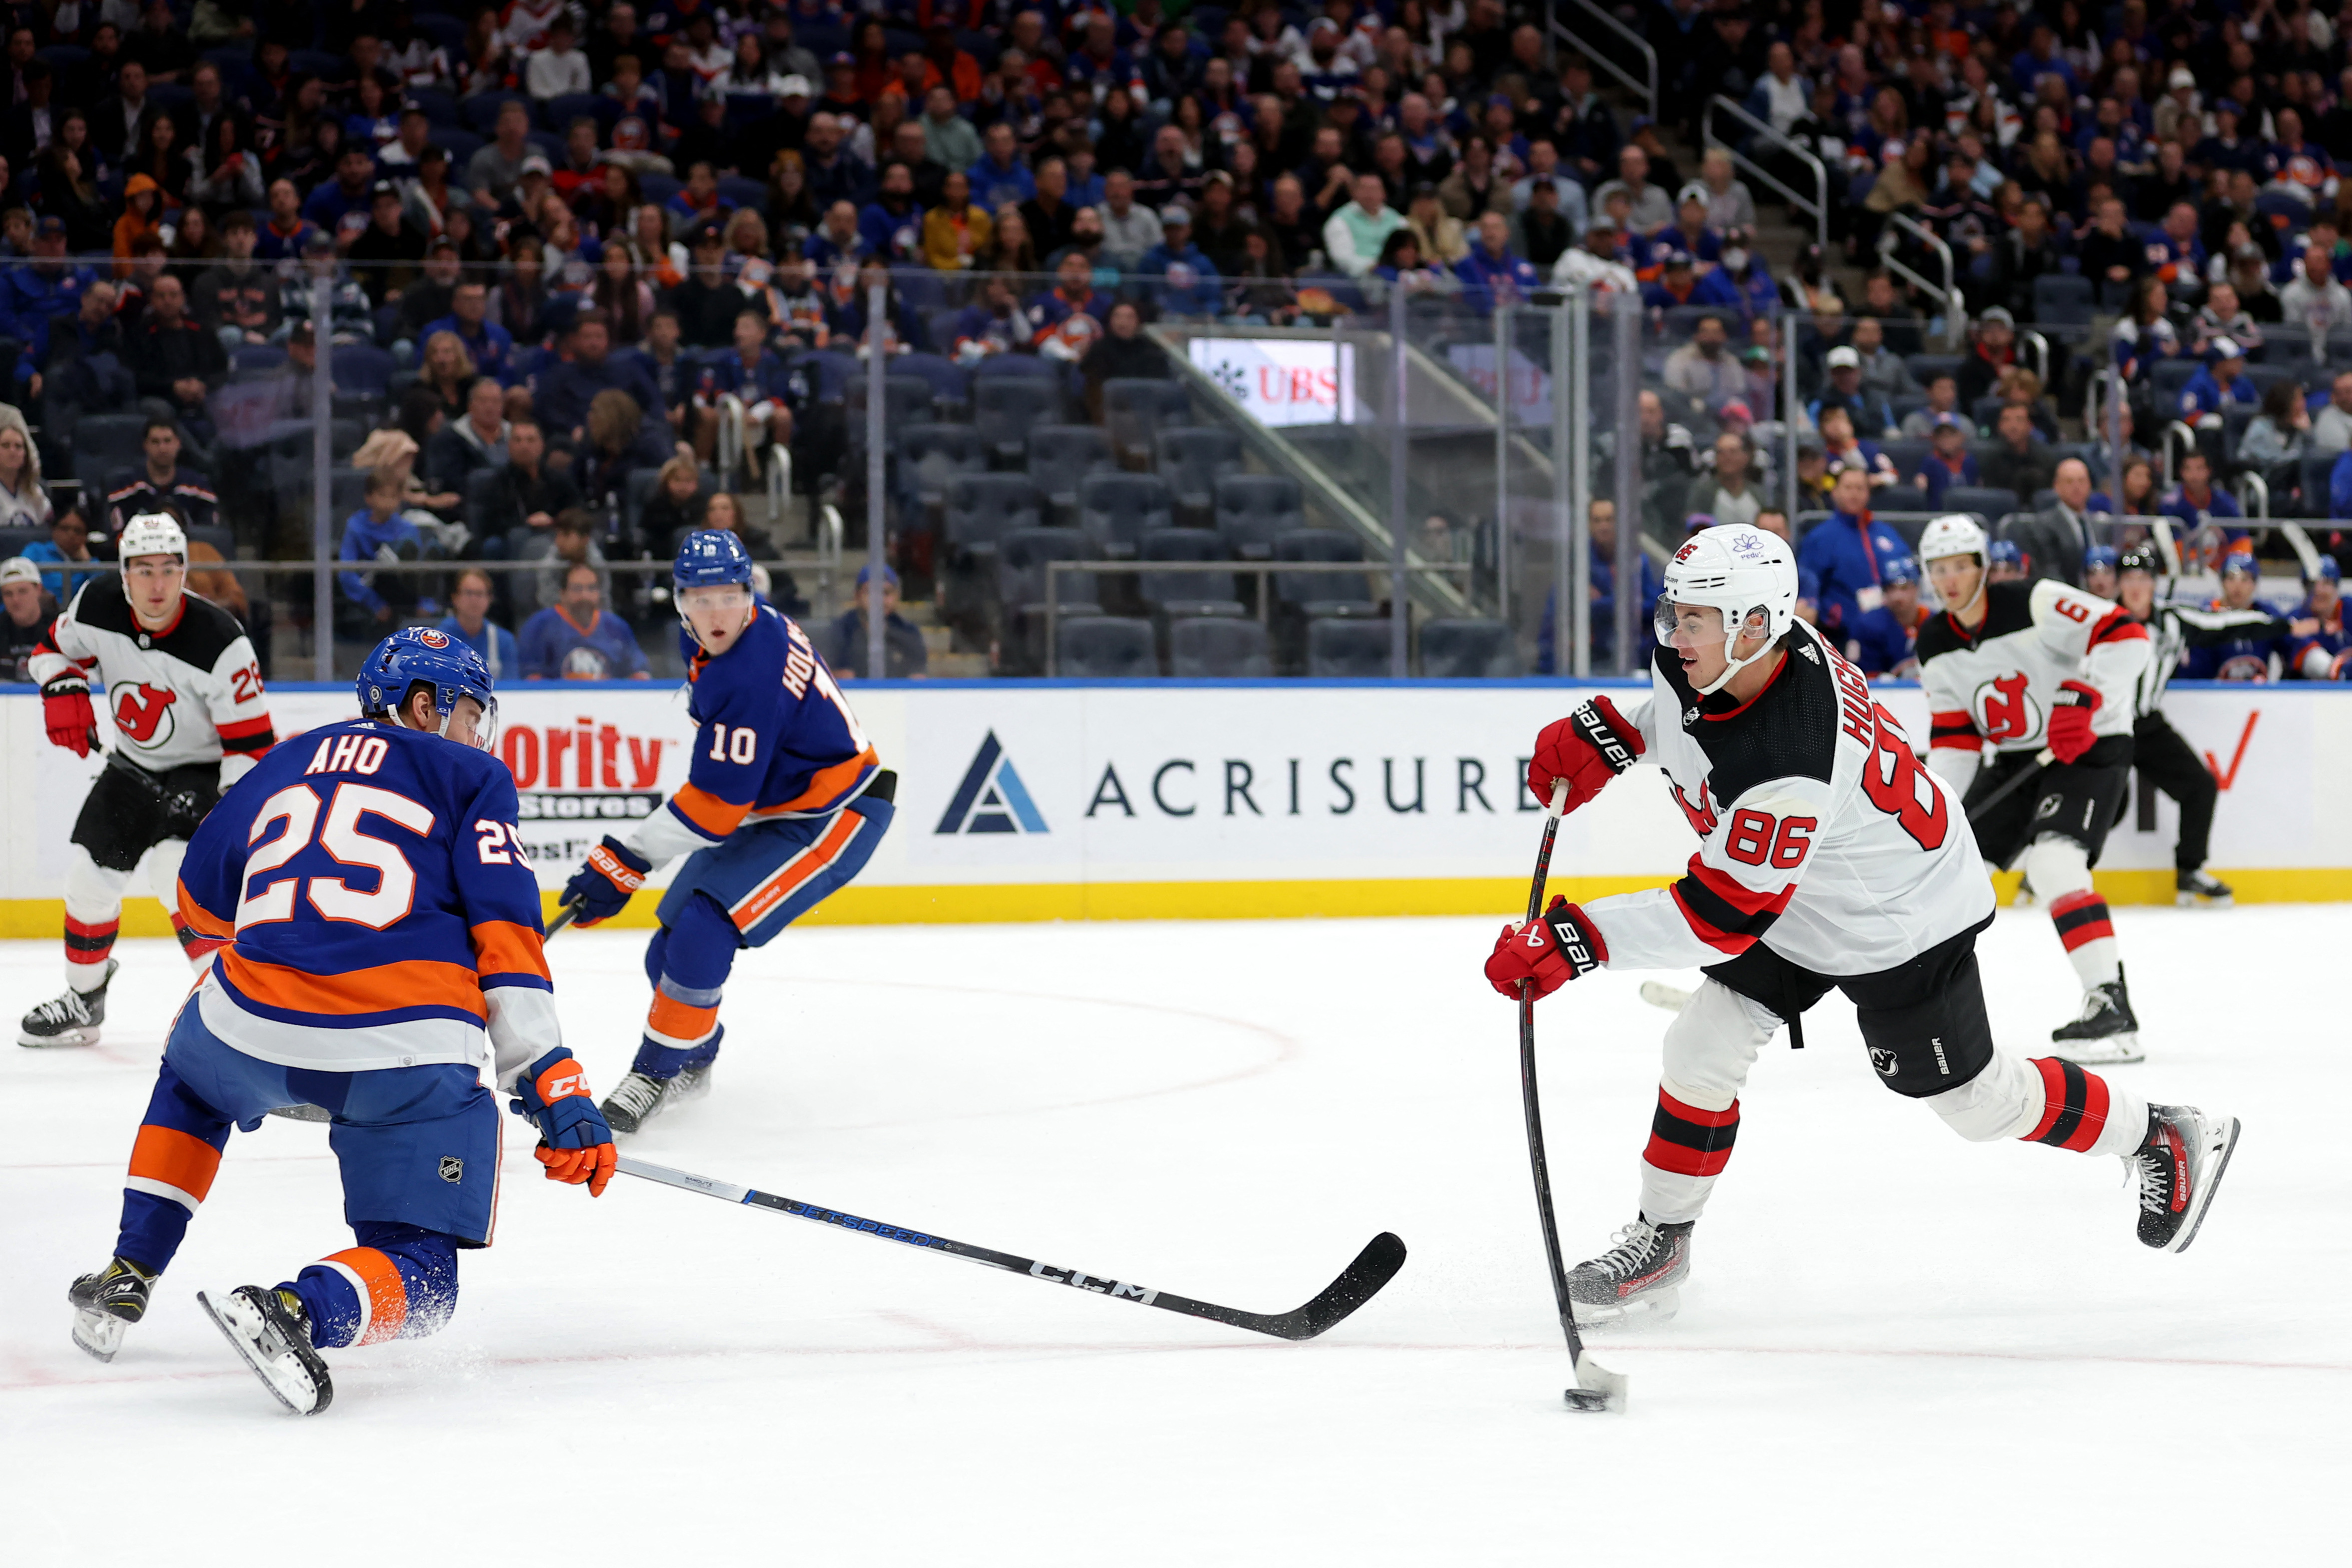 Jack Hughes New Jersey Devils beat Montreal Canadiens shootout 